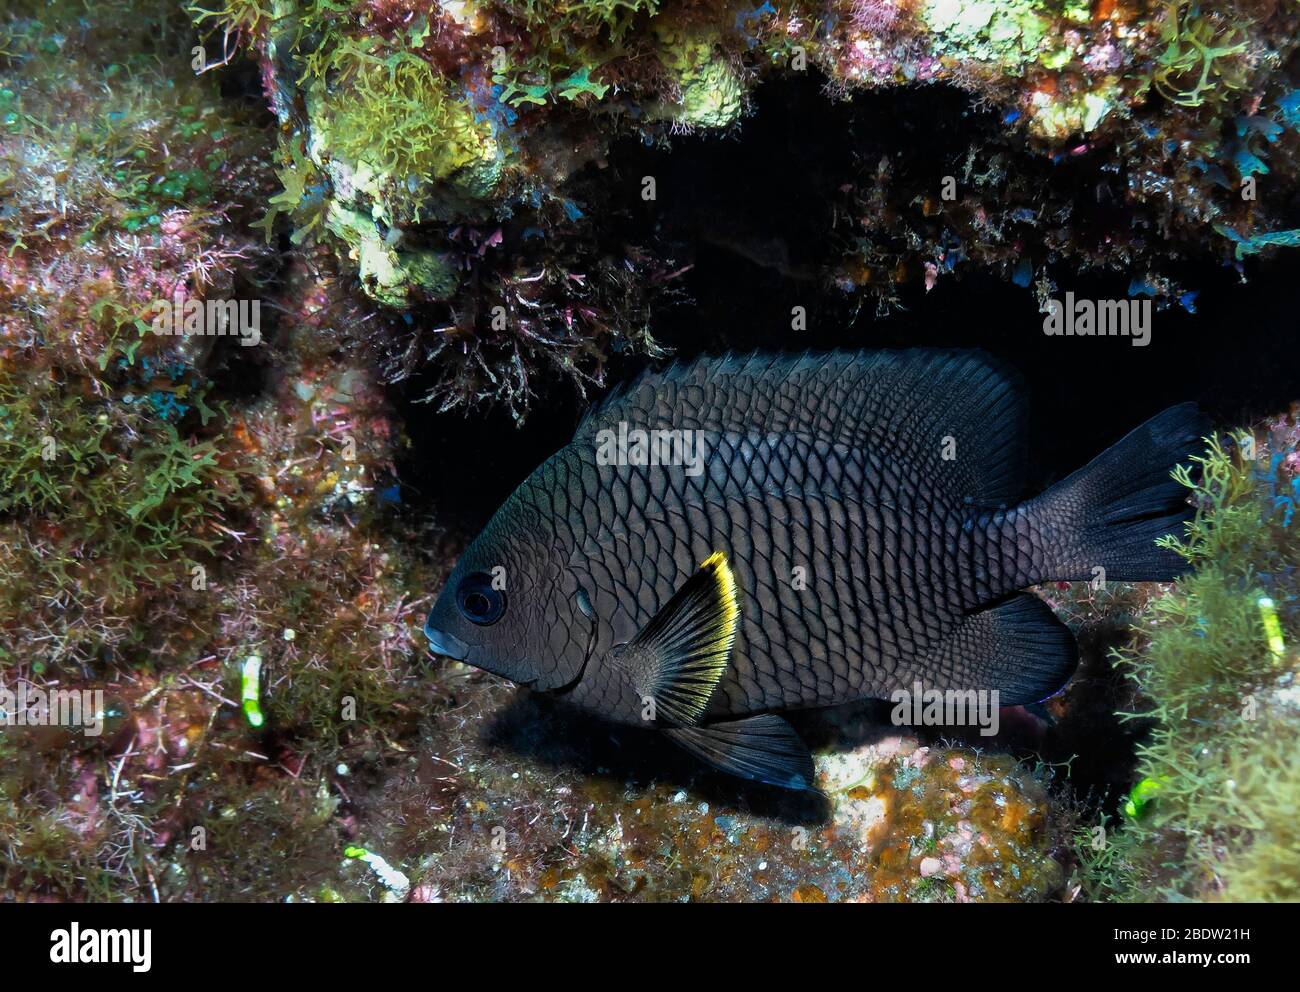 Whitetail damselfish (Stegastes leucorus) swims above a rocky reef on an underwater volcano, Revillagigedo Islands, Mexico, East Pacific Ocean, color Stock Photo